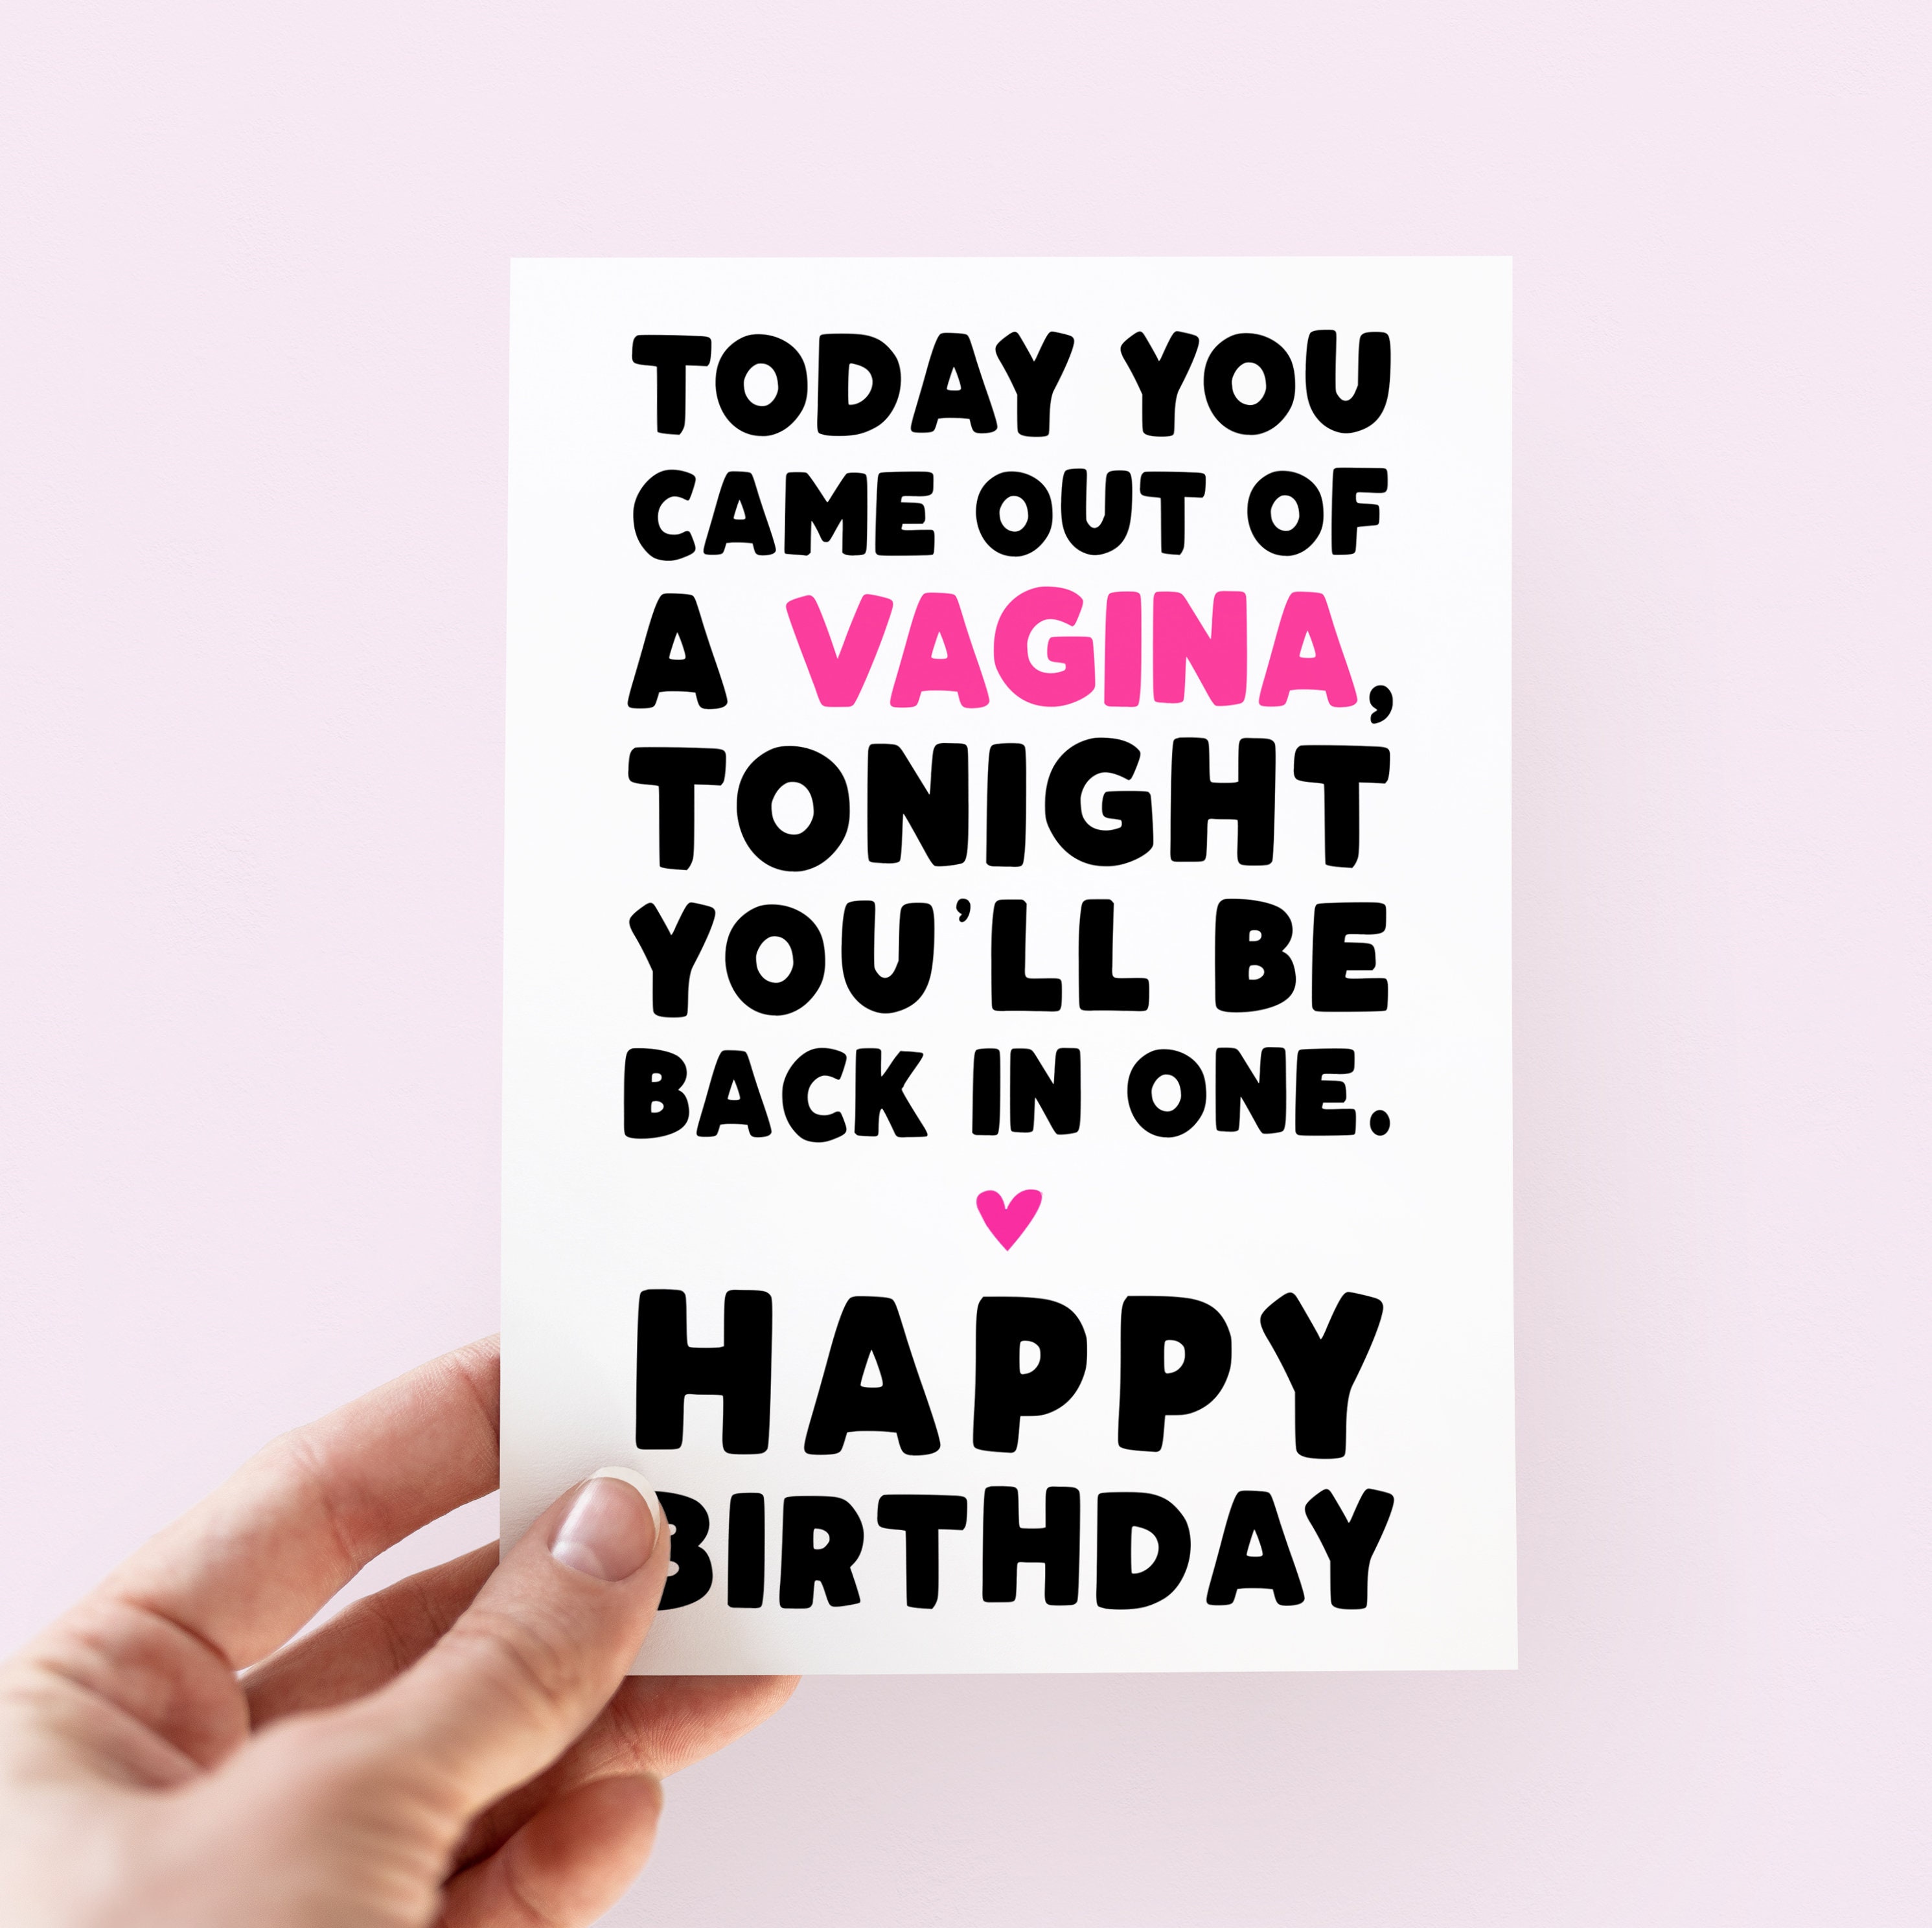 Today You Came Out of A Vagina Birthday Card Funny